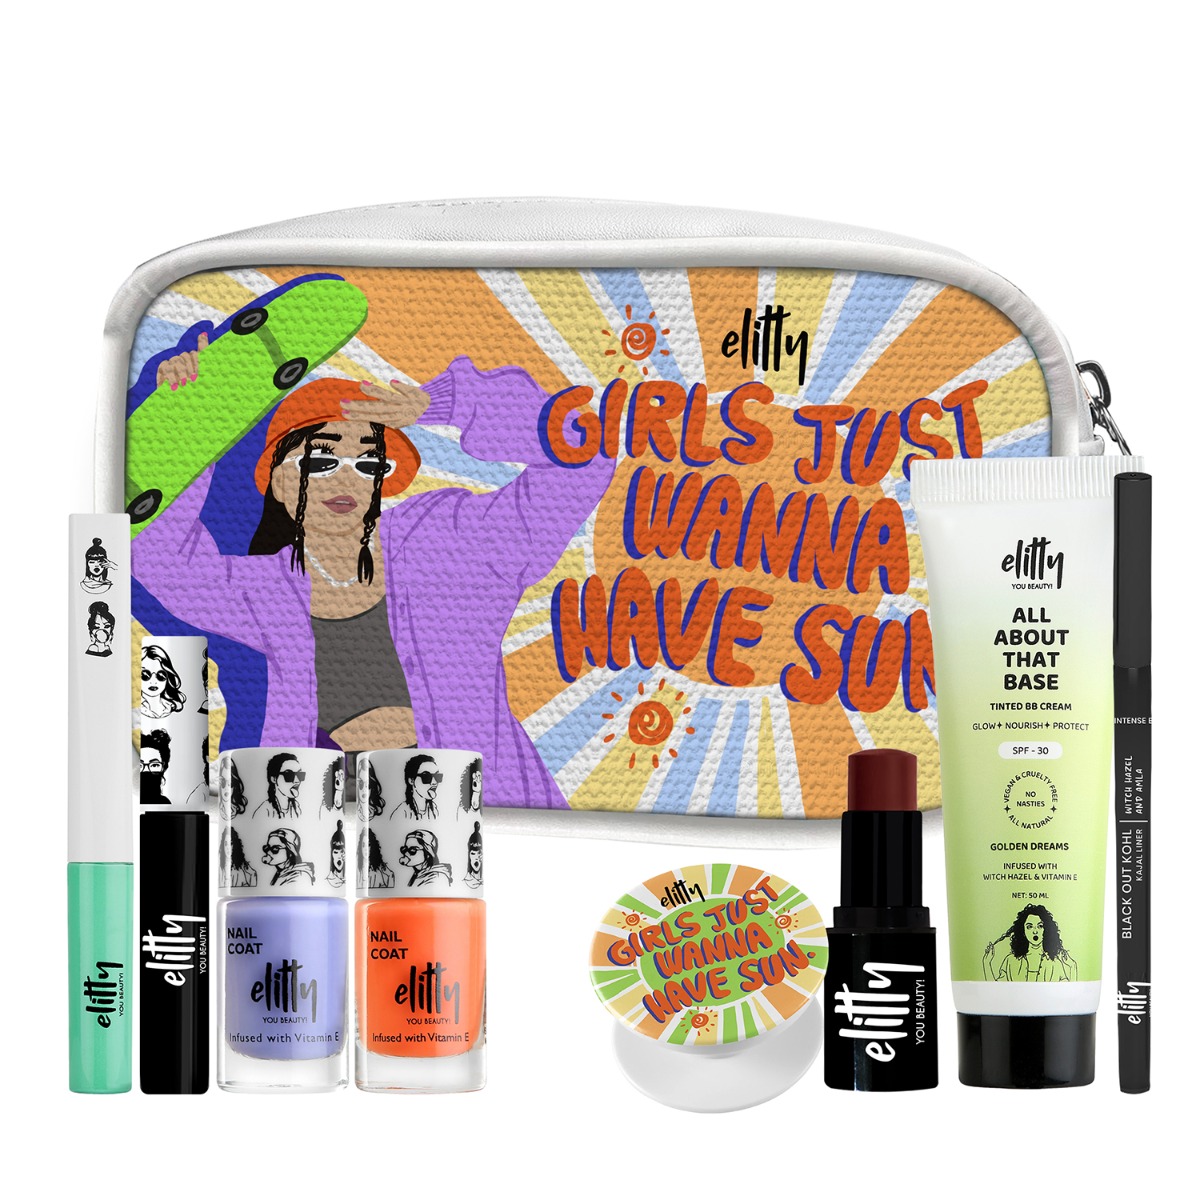 Elitty Girls Just Wanna Have Sun Kit (Deep) - Complete Makeup Kit For Teens, Pack Of 7